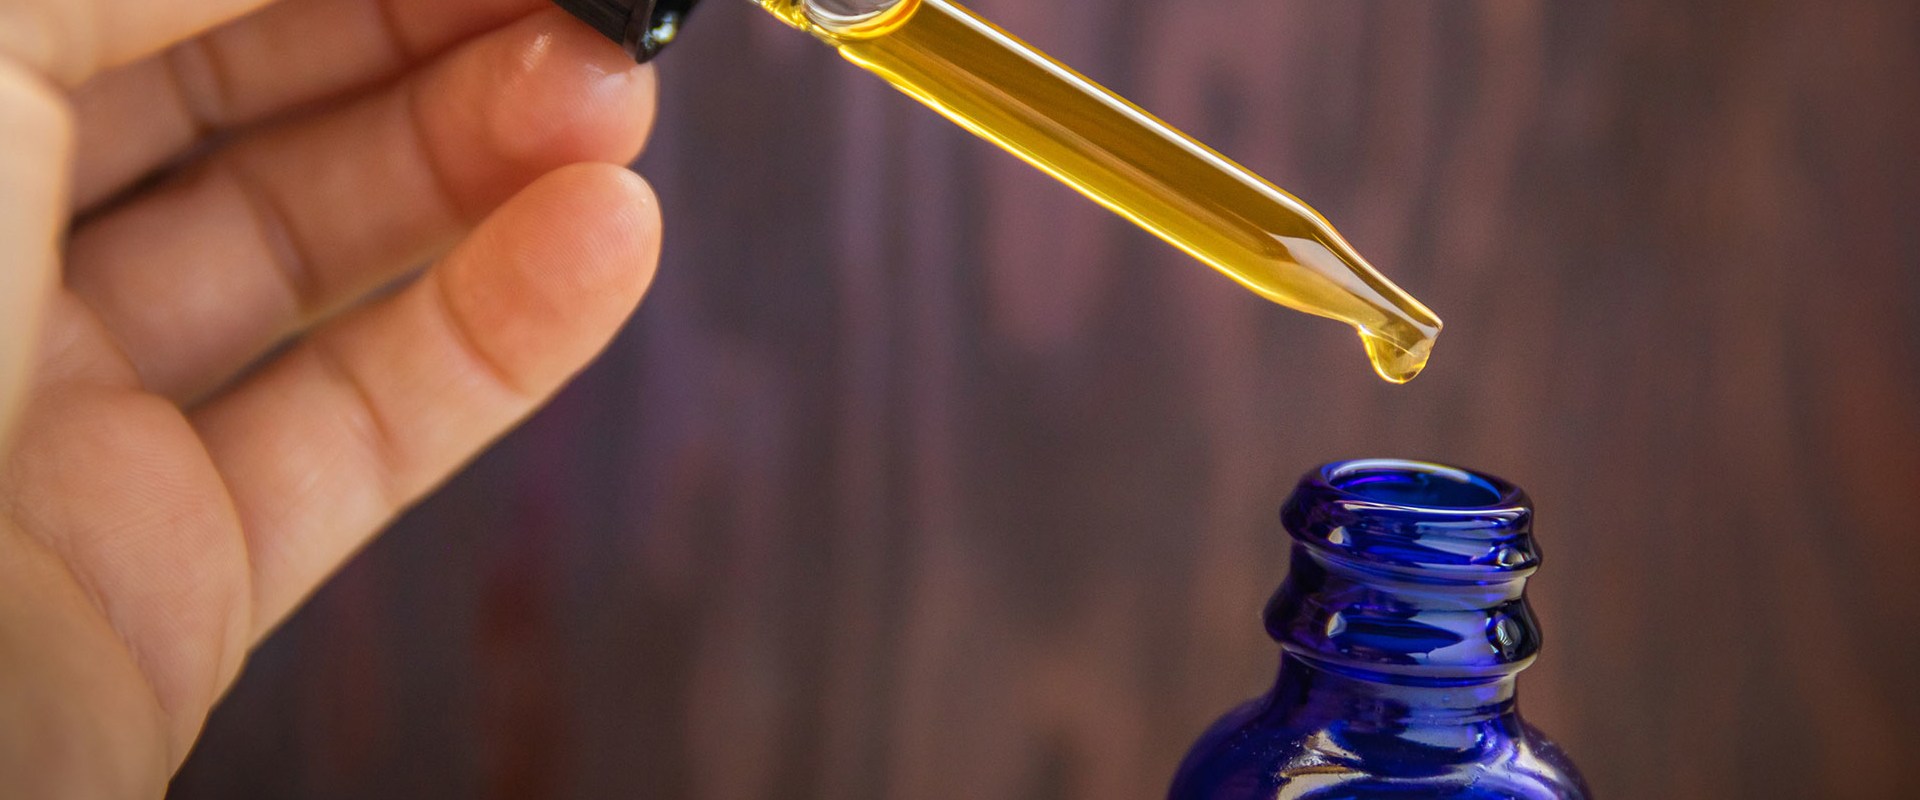 Are there any health risks associated with consuming tinctures made with wax thc?